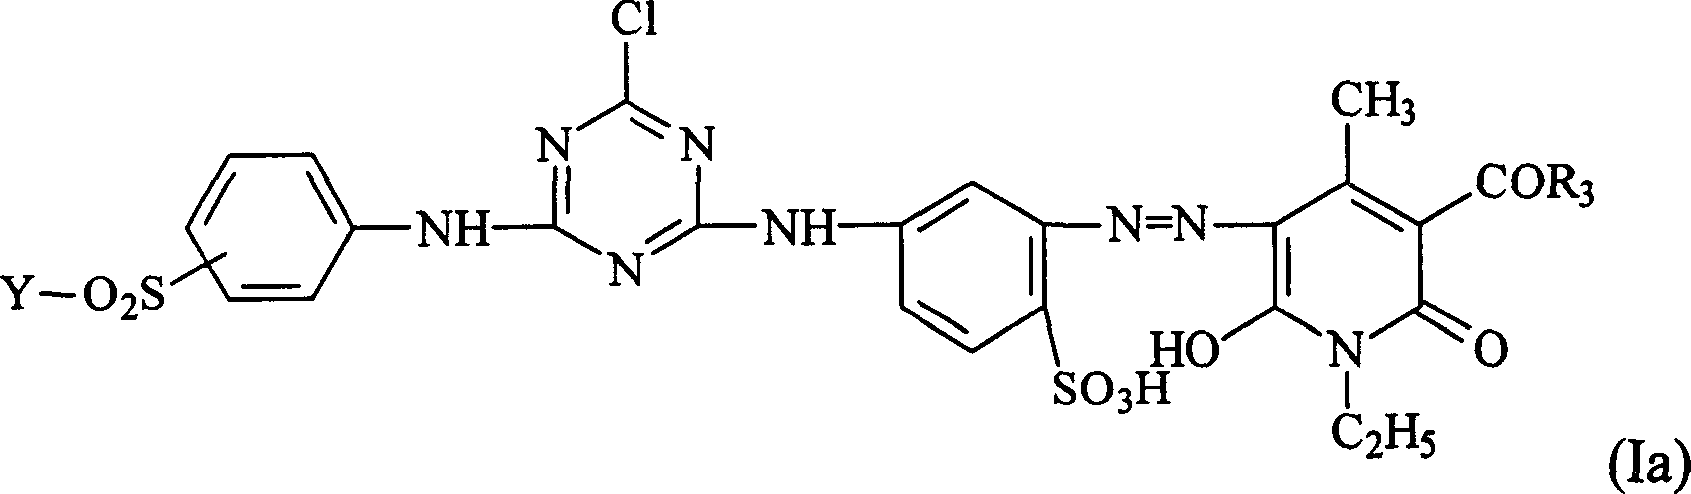 Reaction dyestuff composition and its application